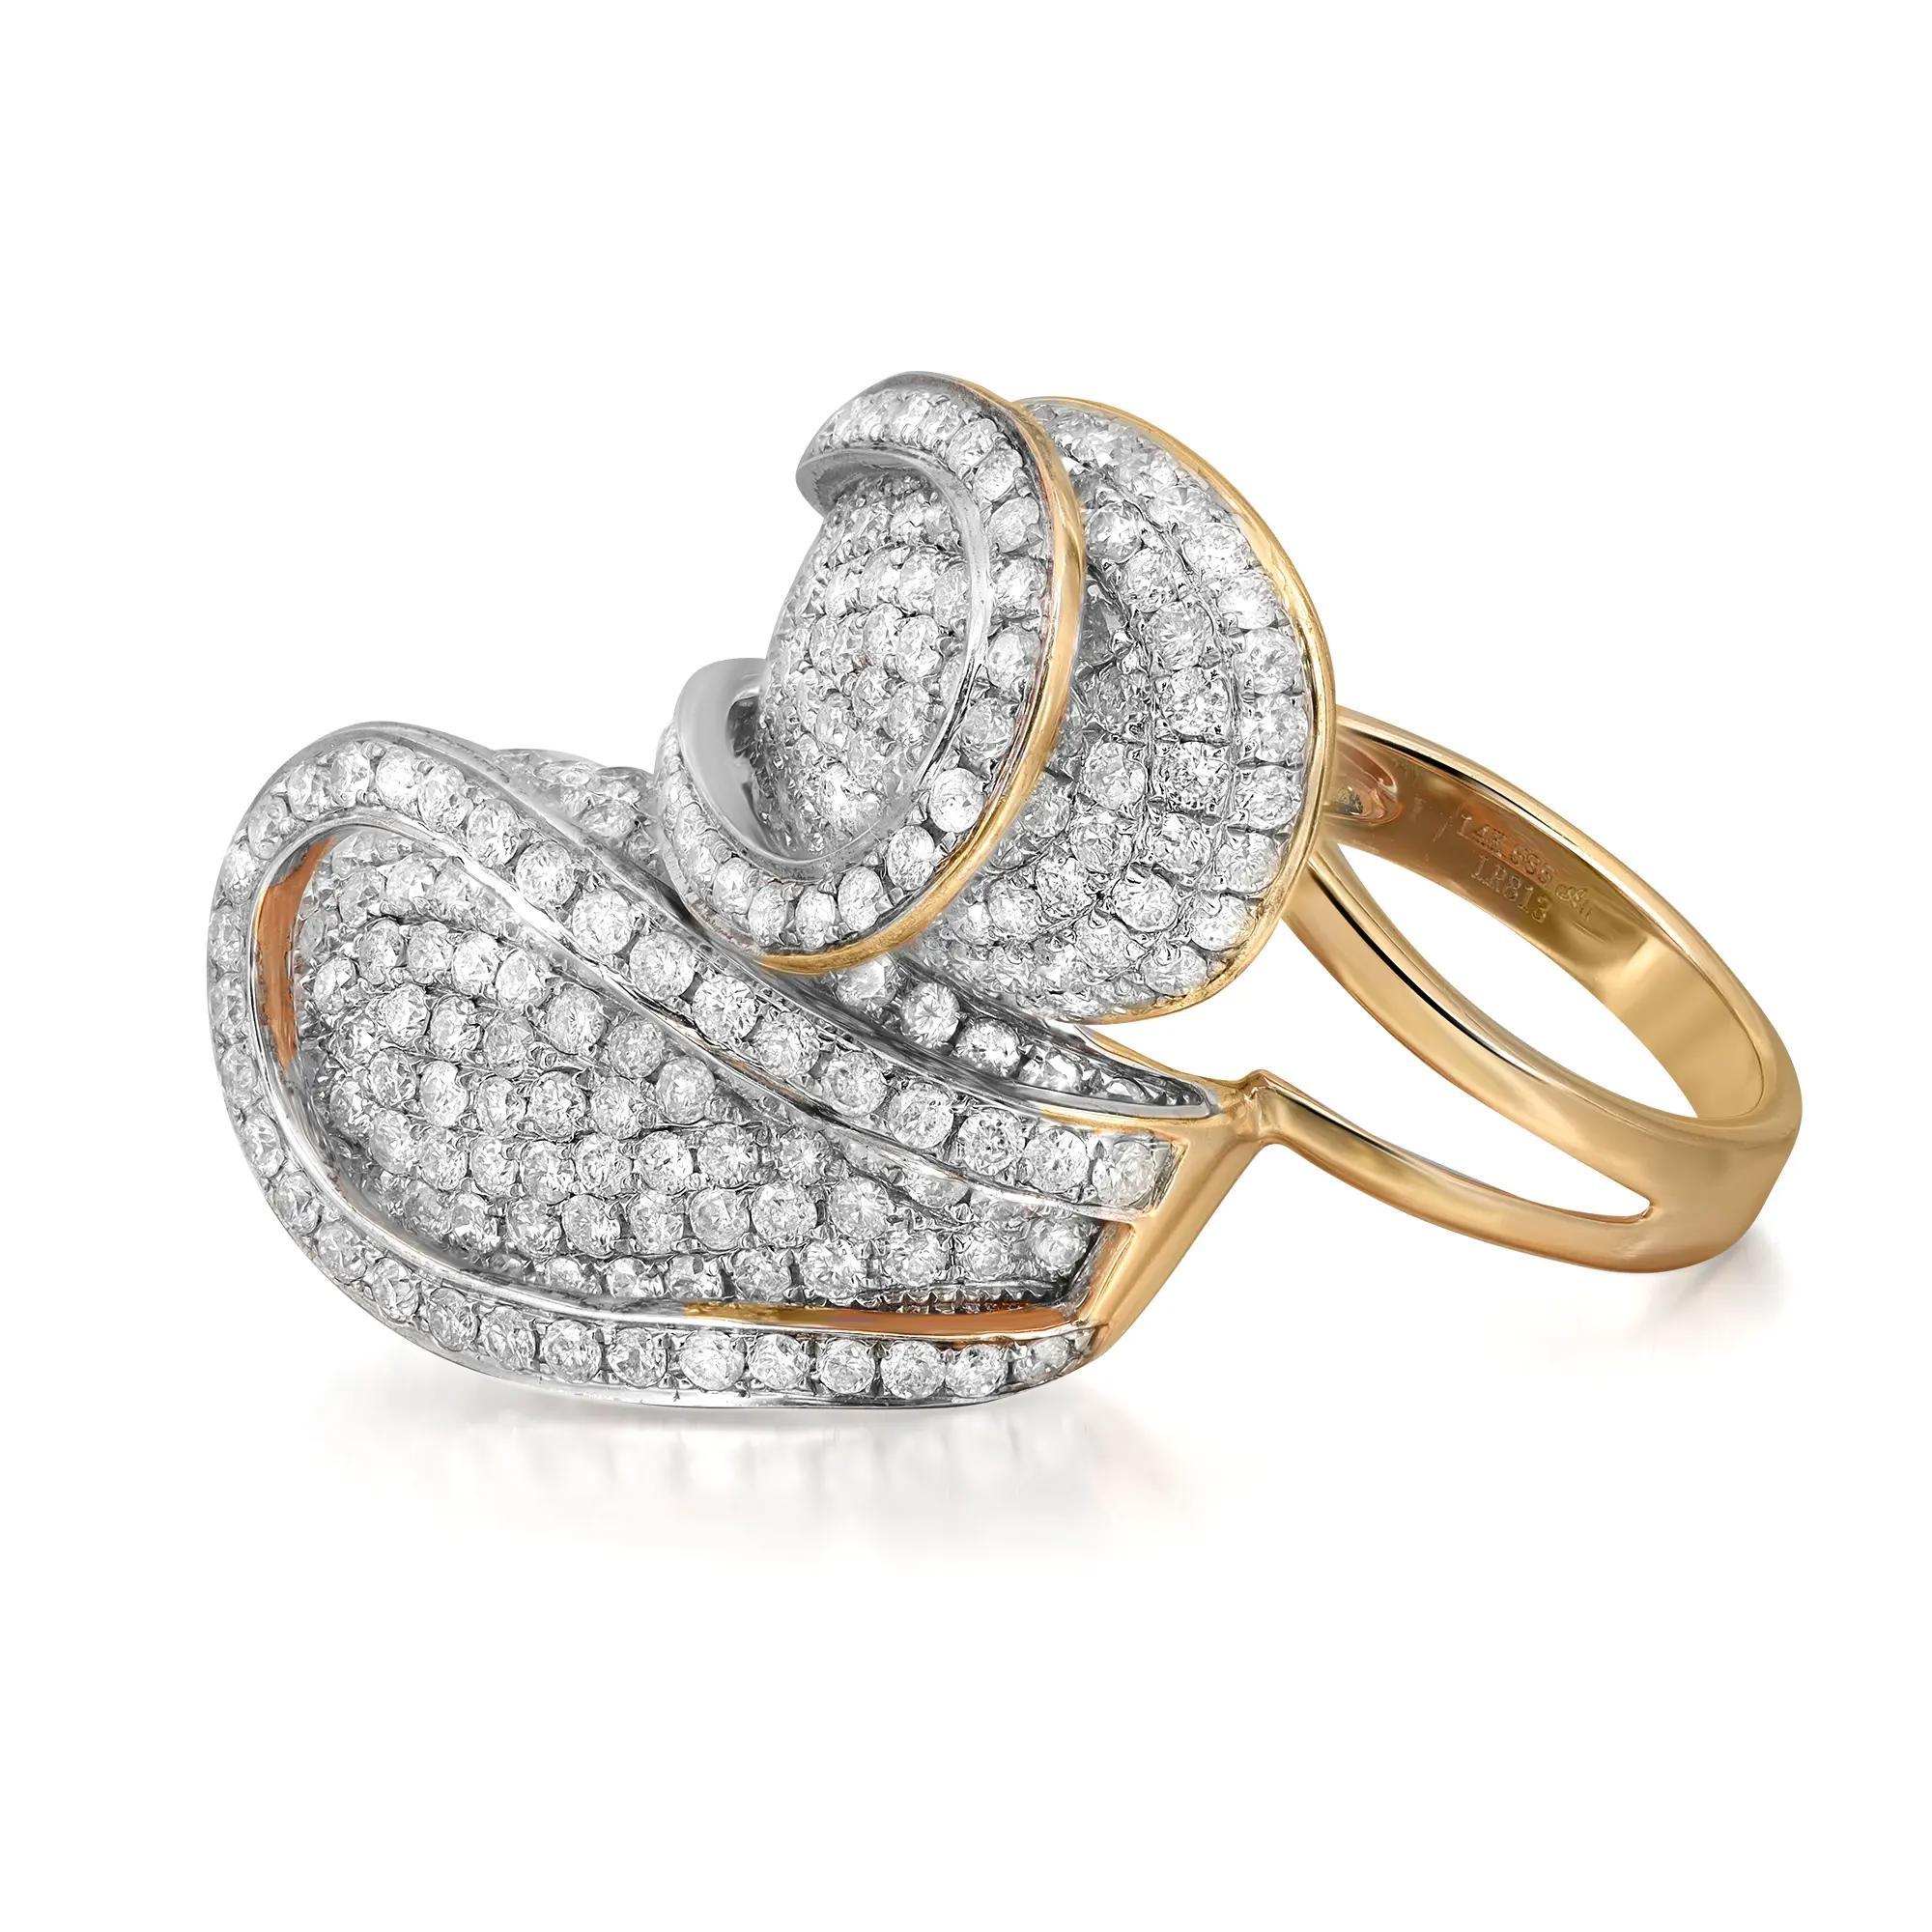 Dazzle away with this bold ladies cocktail ring. Crafted in 14k yellow gold. Showcasing prong set round brilliant cut diamonds weighing 3.30 carats. Diamond quality: I color and SI1 clarity. Ring size: 7.75. Total weight: 11.25 grams. This ring is